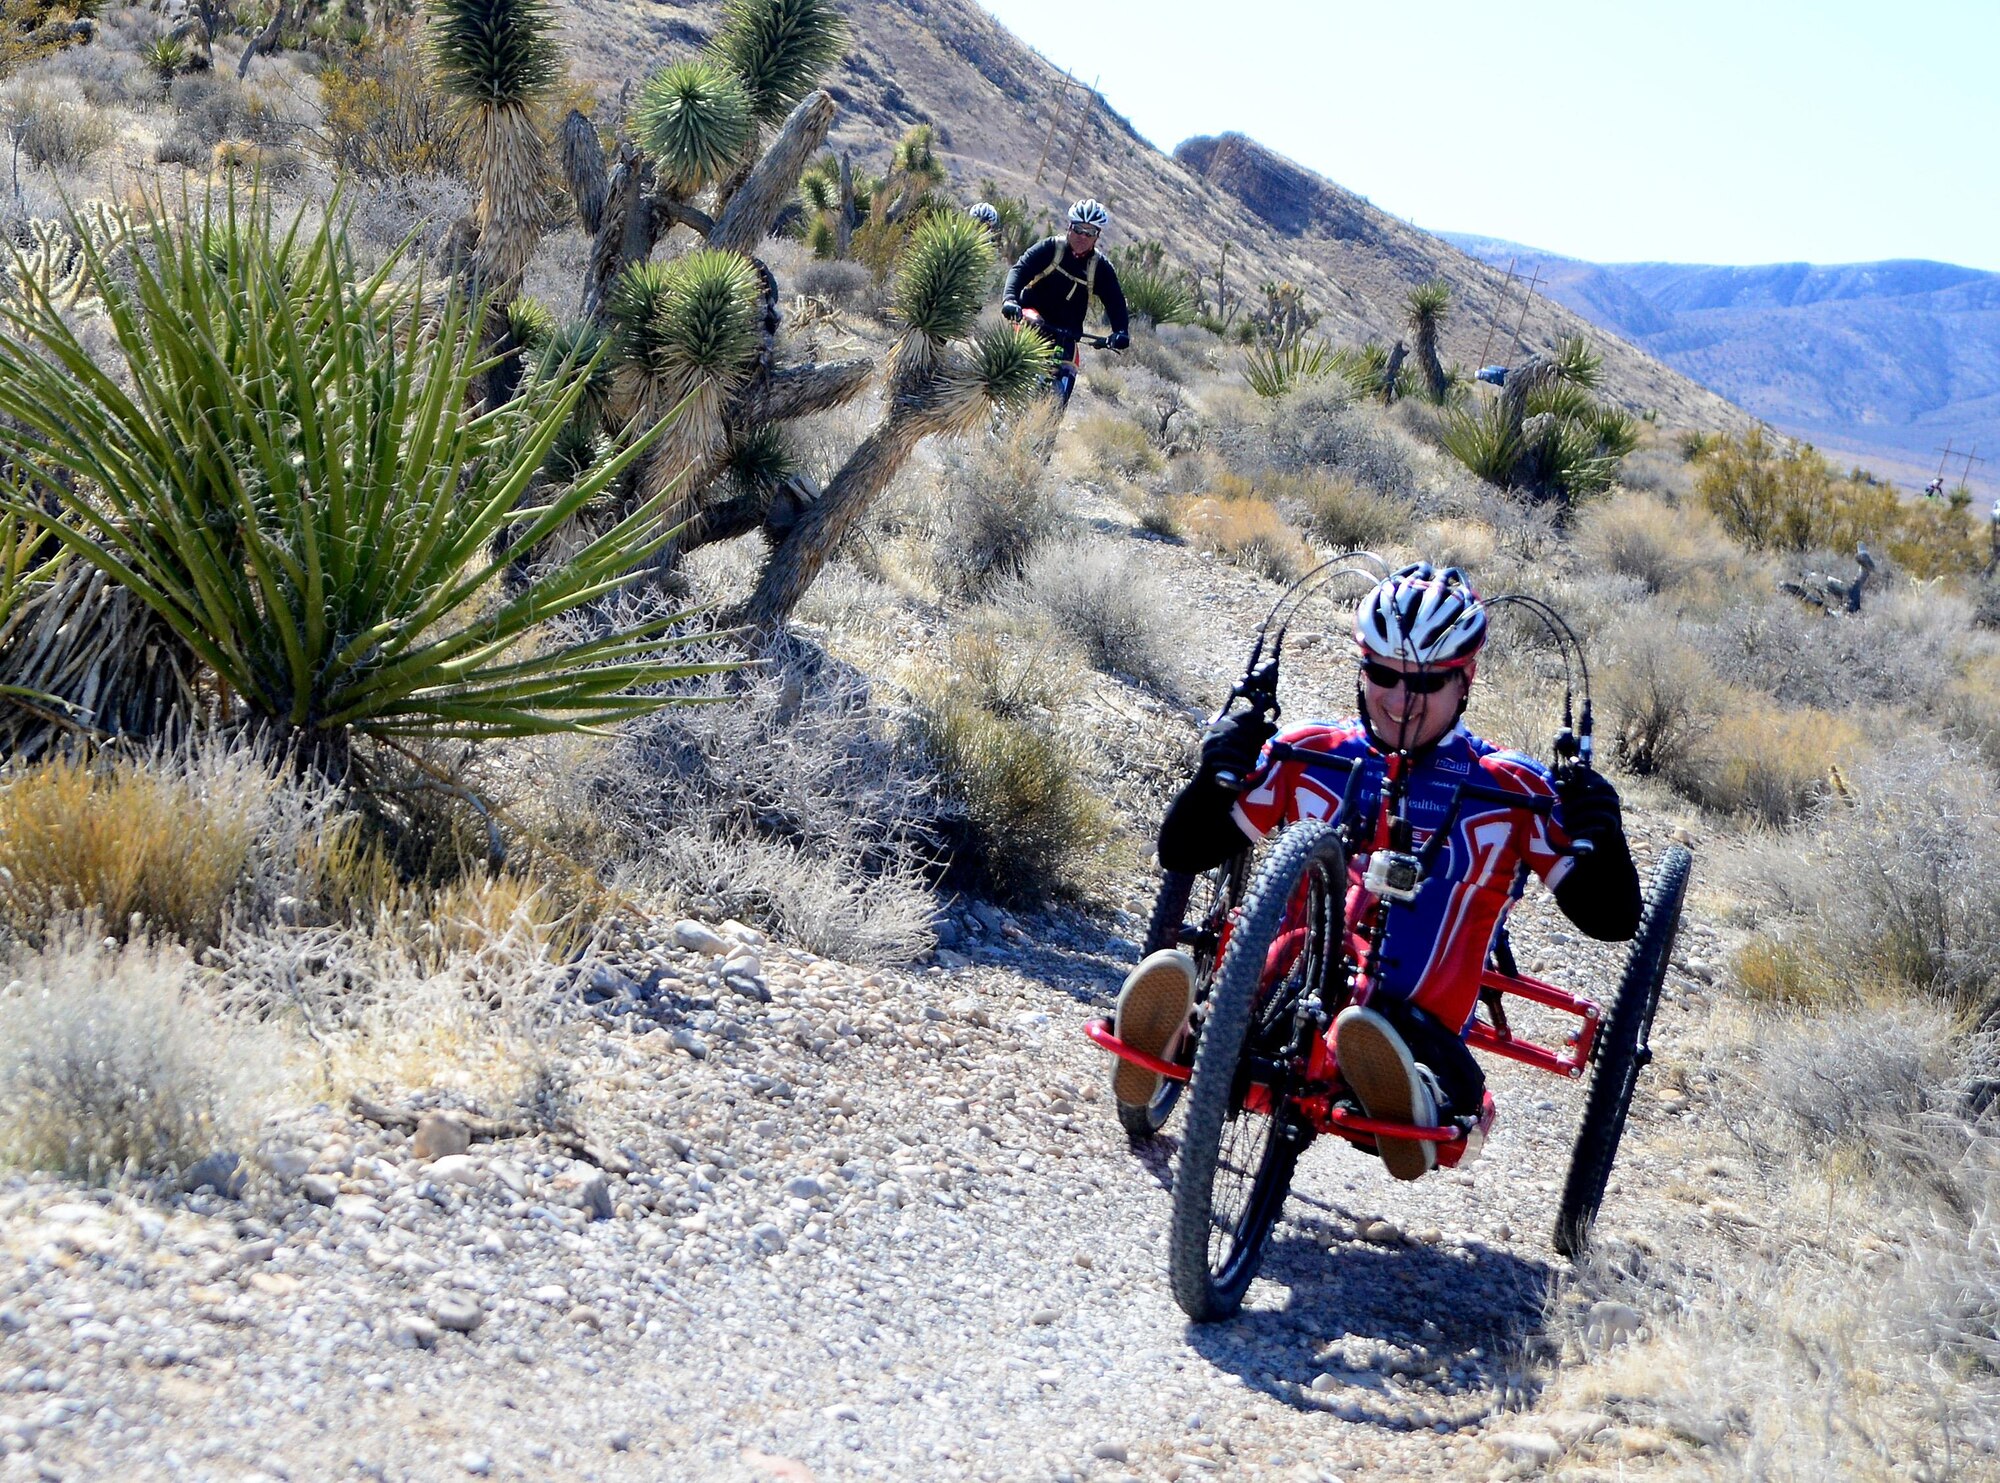 A recovering U.S. veteran rides his custom mountain bike as part of a Ride 2 Recovery program event Feb. 2, 2016, at Blue Diamond, Nev. The program is dedicated to helping wounded and recovering veterans by bringing the veterans together to lift their spirits and even provide custom made bikes for the disabled free of charge. (U.S. Air Force photo/Senior Airman Christian Clausen)